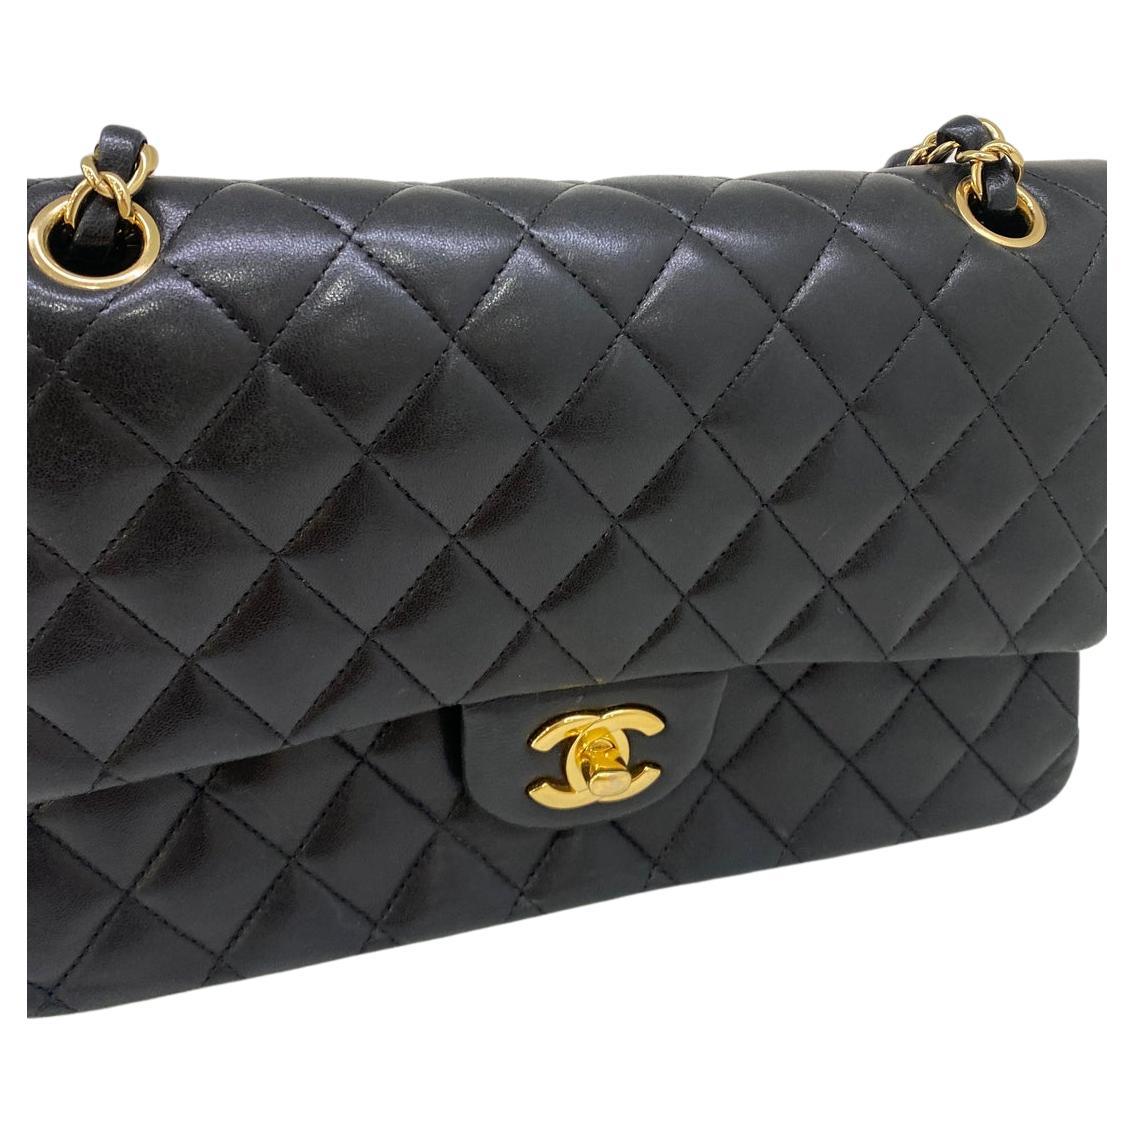 chanel black quilted leather bag